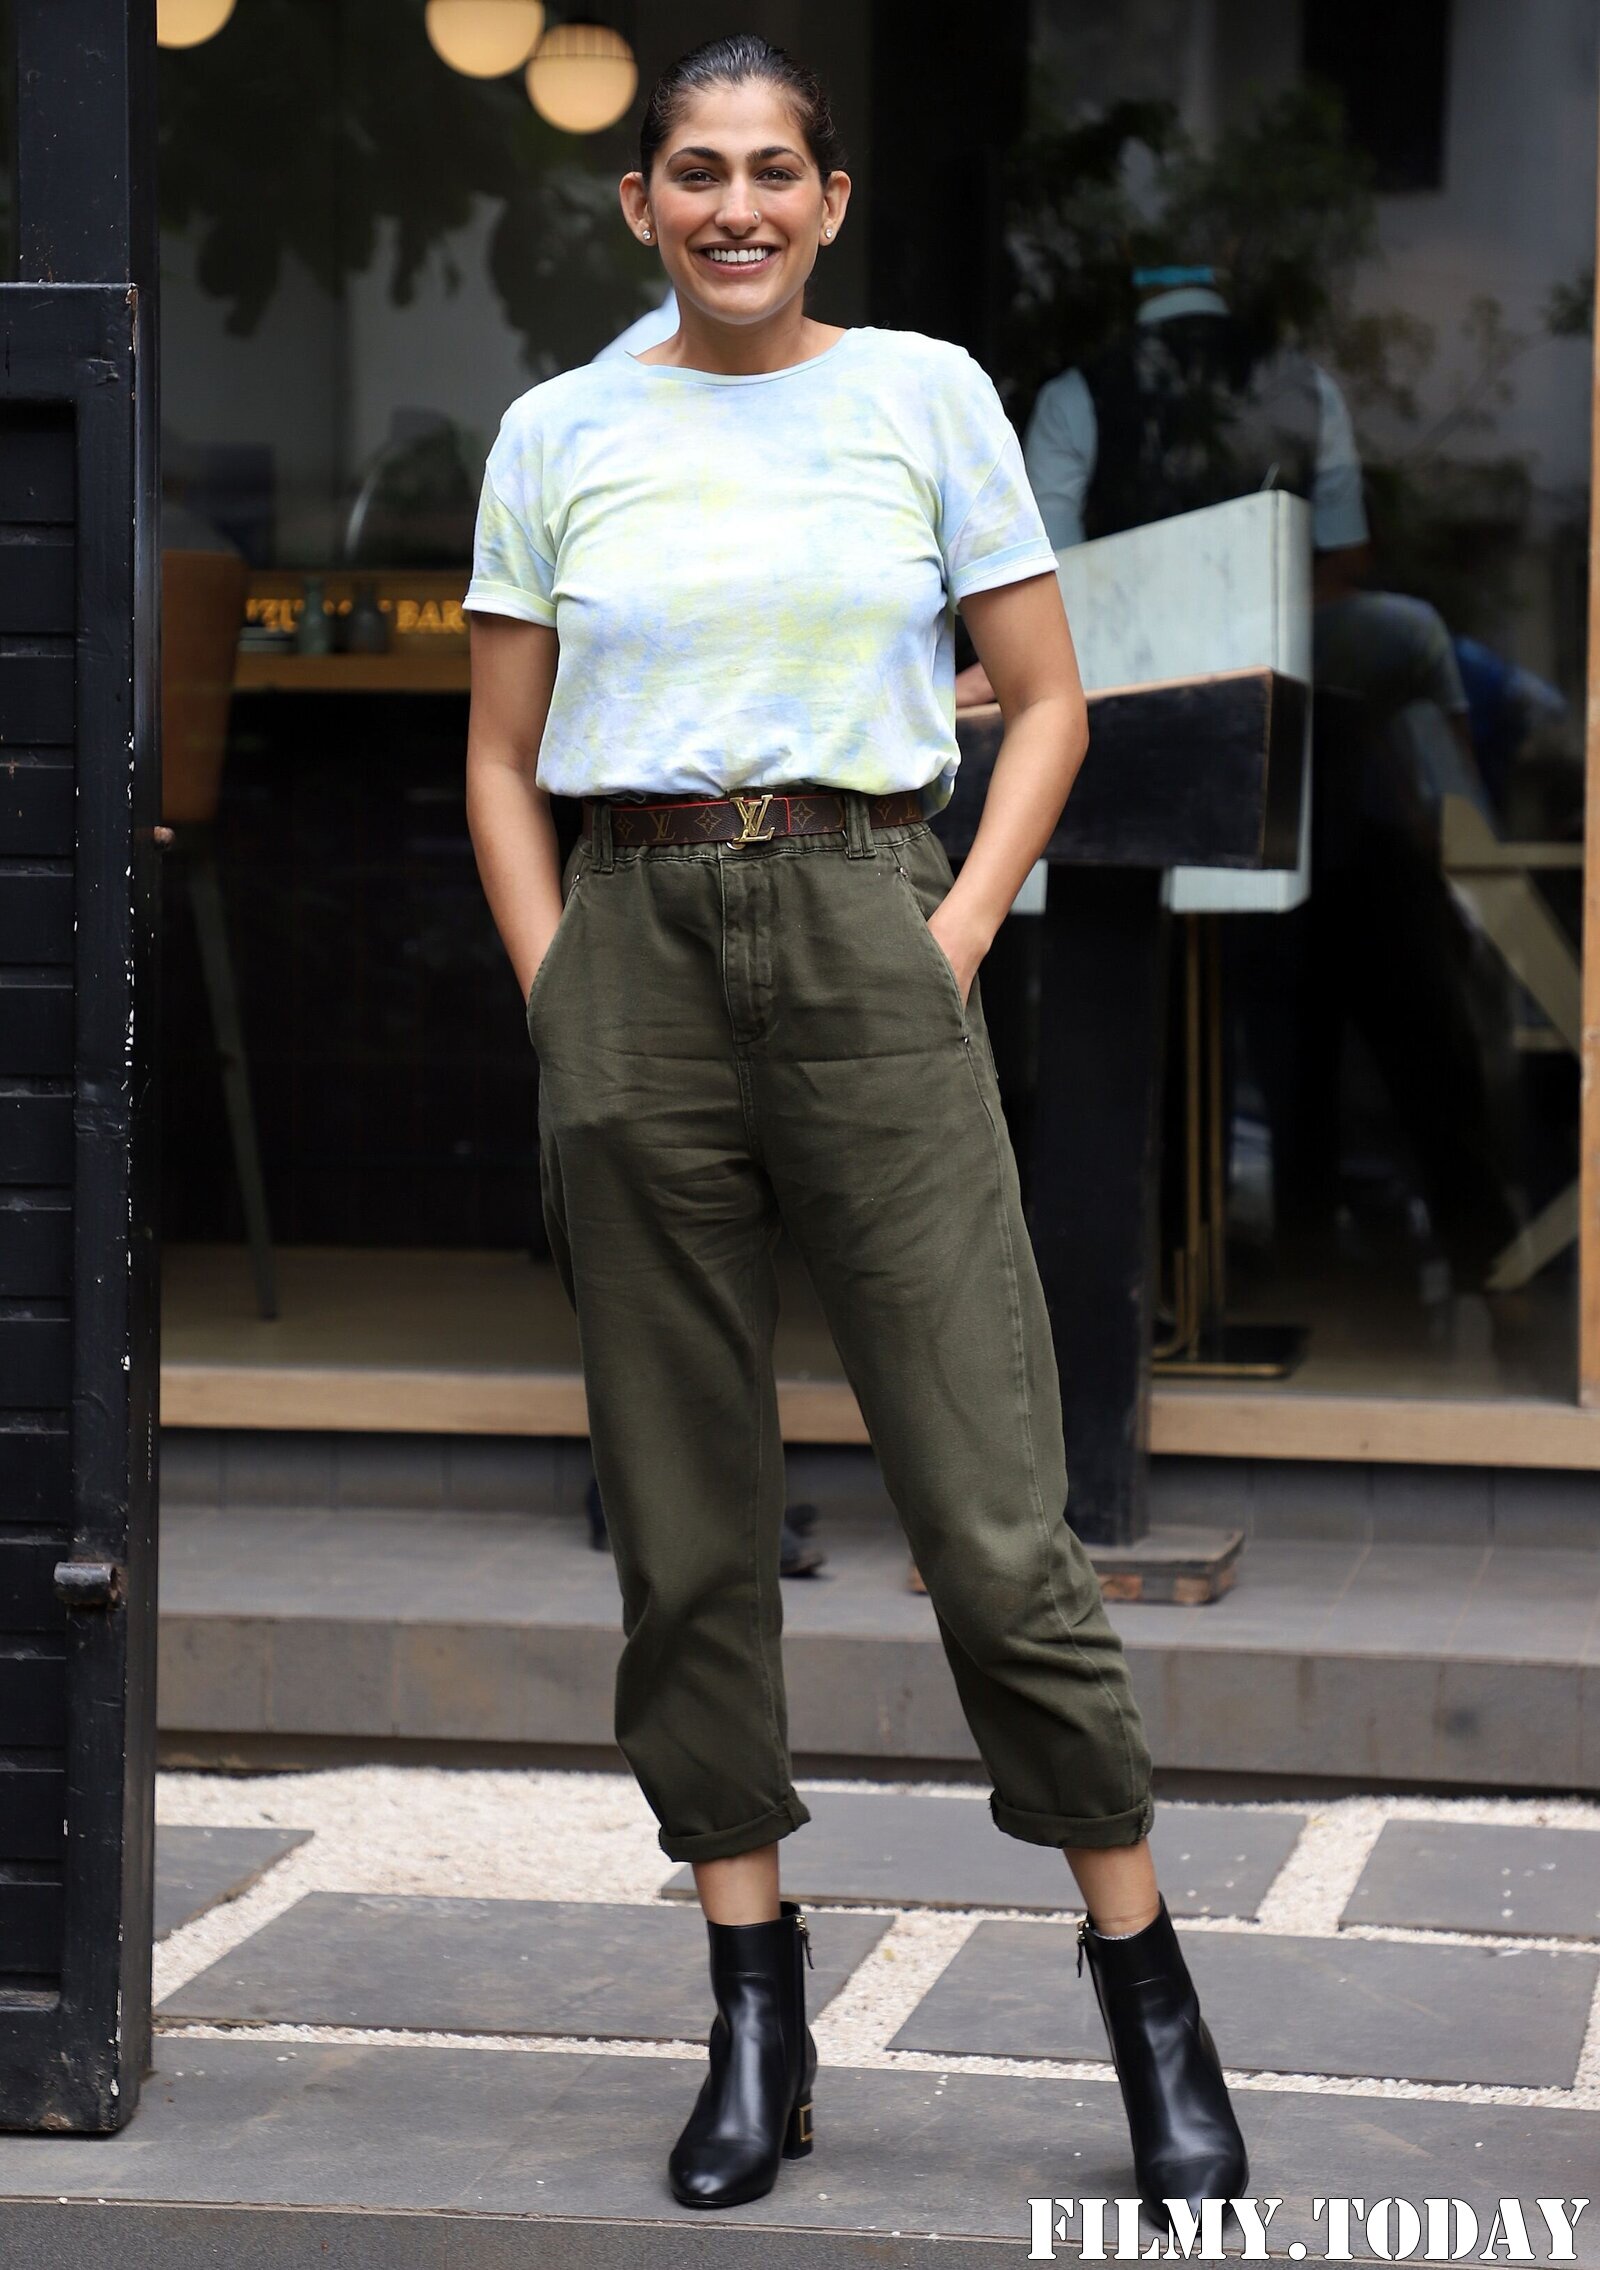 Kubbra Sait - Photos: Celebs Spotted At Bandra | Picture 1820895